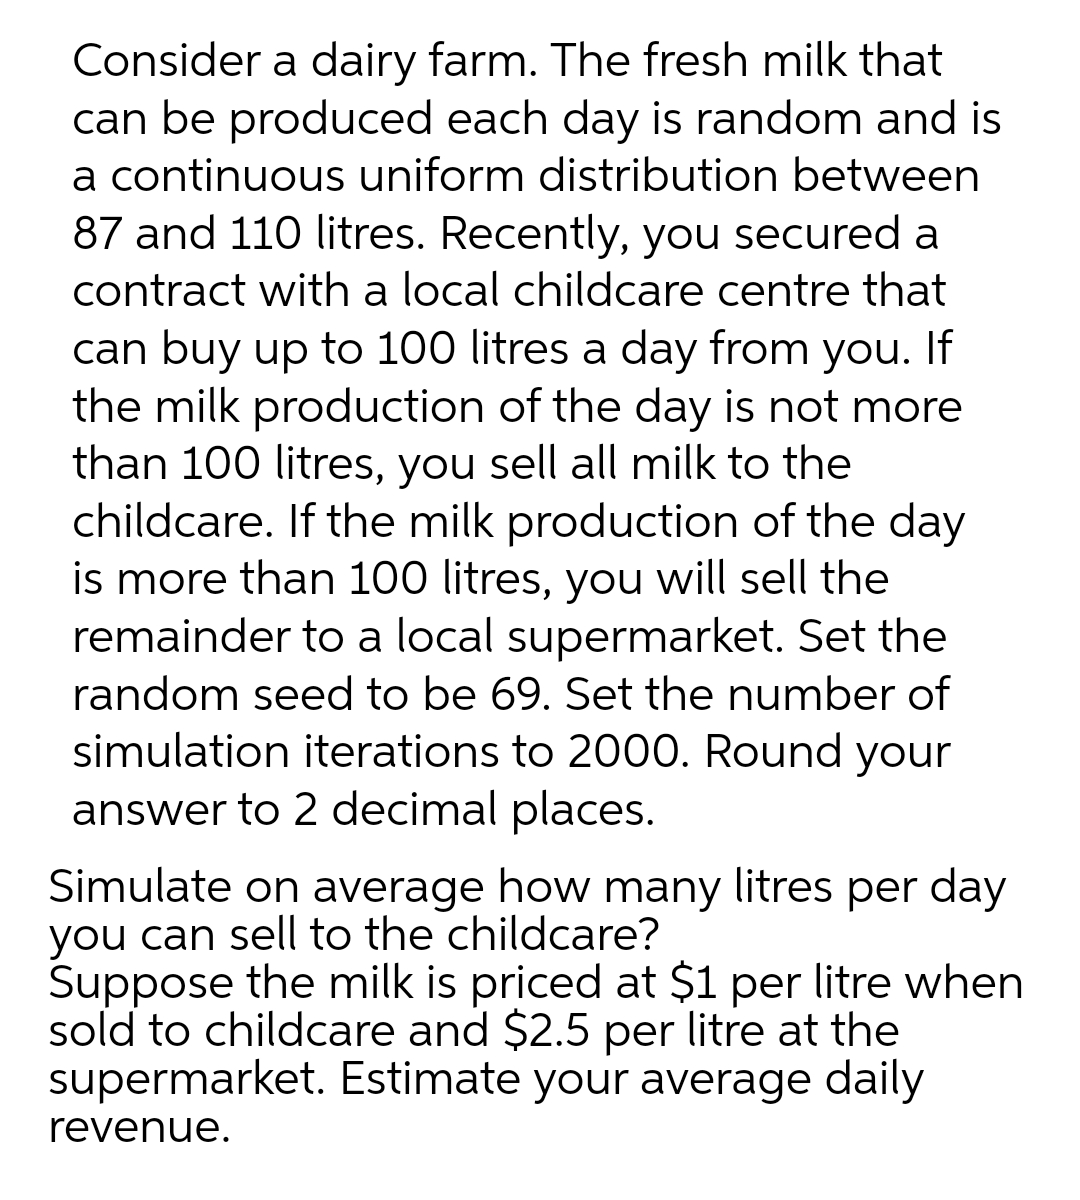 Consider a dairy farm. The fresh milk that
can be produced each day is random and is
a continuous uniform distribution between
87 and 110 litres. Recently, you secured a
contract with a local childcare centre that
can buy up to 100 litres a day from you. If
the milk production of the day is not more
than 100 litres, you sell all milk to the
childcare. If the milk production of the day
is more than 100 litres, you will sell the
remainder to a local supermarket. Set the
random seed to be 69. Set the number of
simulation iterations to 2000. Round your
answer to 2 decimal places.
Simulate on average how many litres per day
you can sell to the childcare?
Suppose the milk is priced at $1 per litre when
sold to childcare and $2.5 per litre at the
supermarket. Estimate your average daily
revenue.
